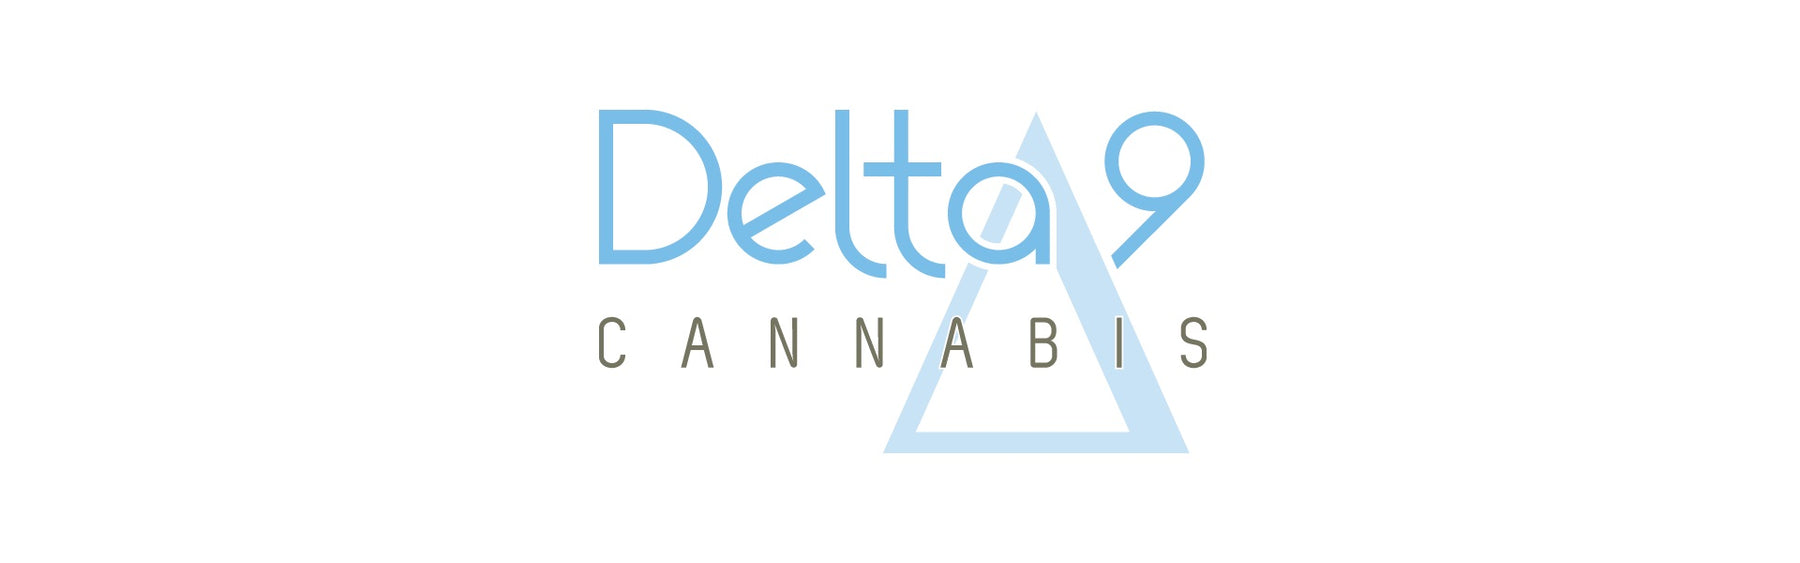 Delta 9 Announces 2nd Year of Operation of Mobile Cannabis Store to Mark 4/20 Cannabis Holiday